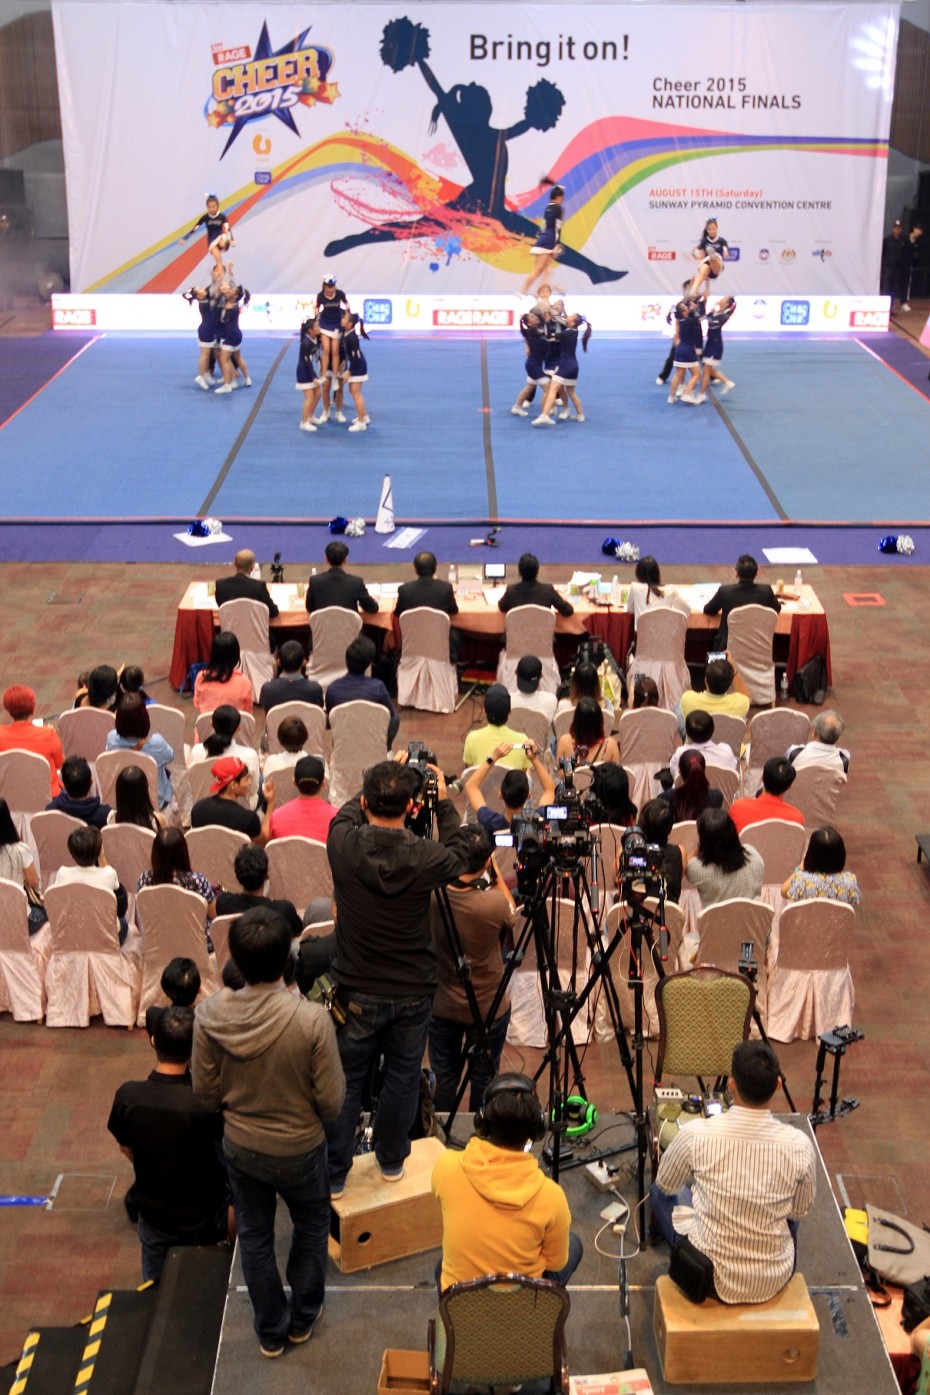 The video crew worked non-stop, making video after video of each of the 39 team's three-minute routines. This was then edited and uploaded on the R.AGE website in less than 10 minutes. -- Photo: SAM THAM/The Star